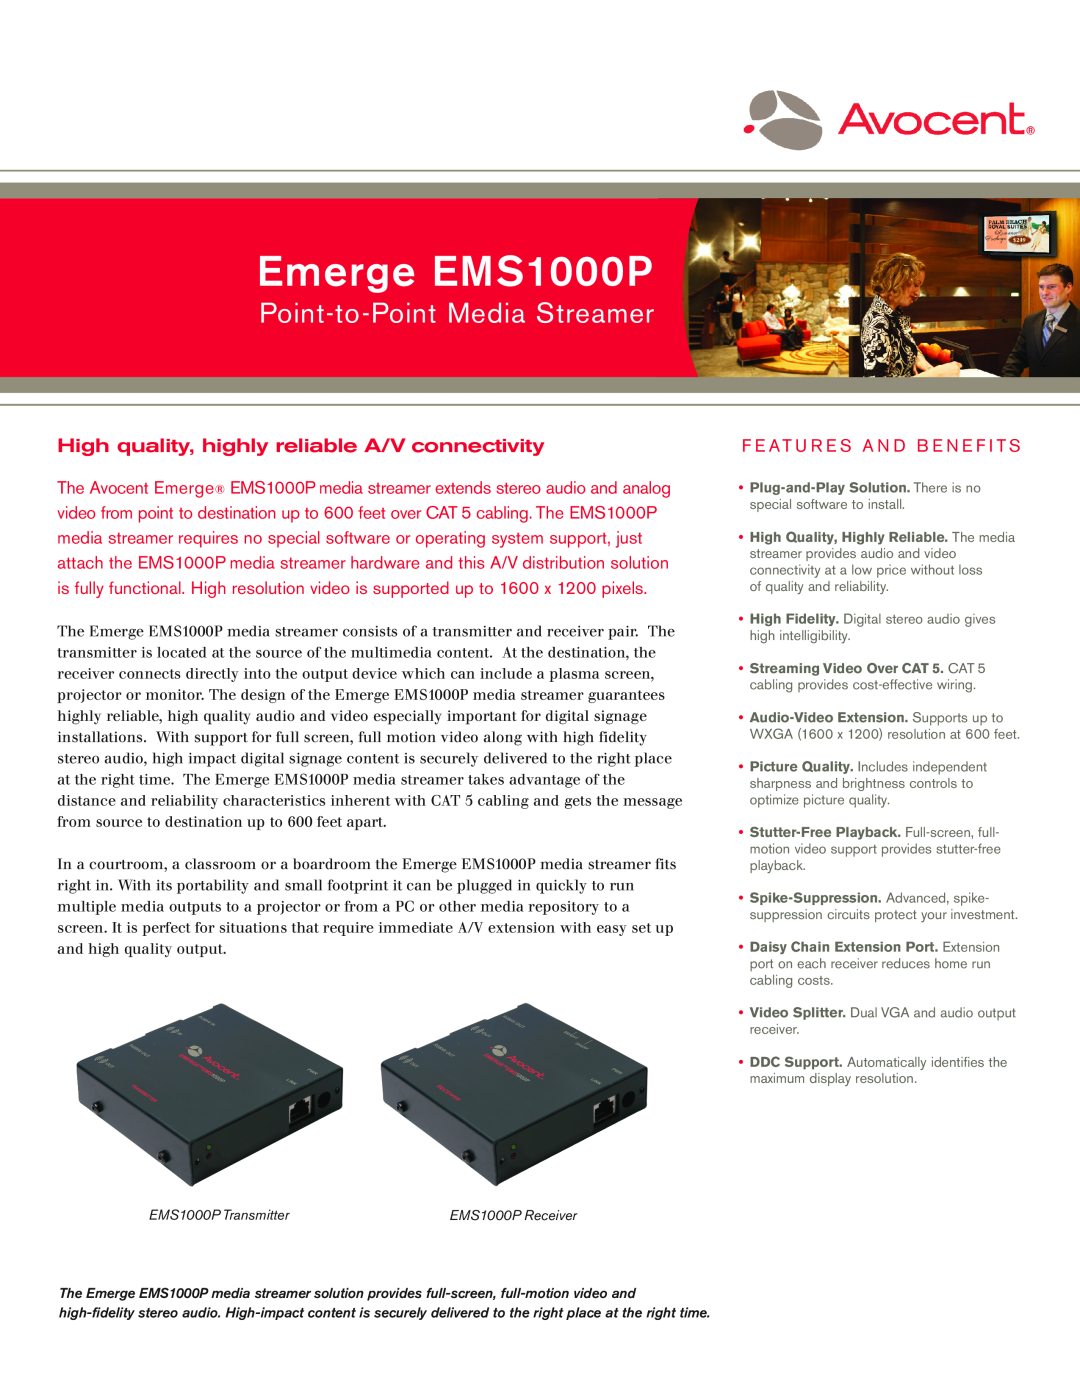 Avocent manual Emerge EMS1000P, Point-to-PointMedia Streamer, High quality, highly reliable A/V connectivity 